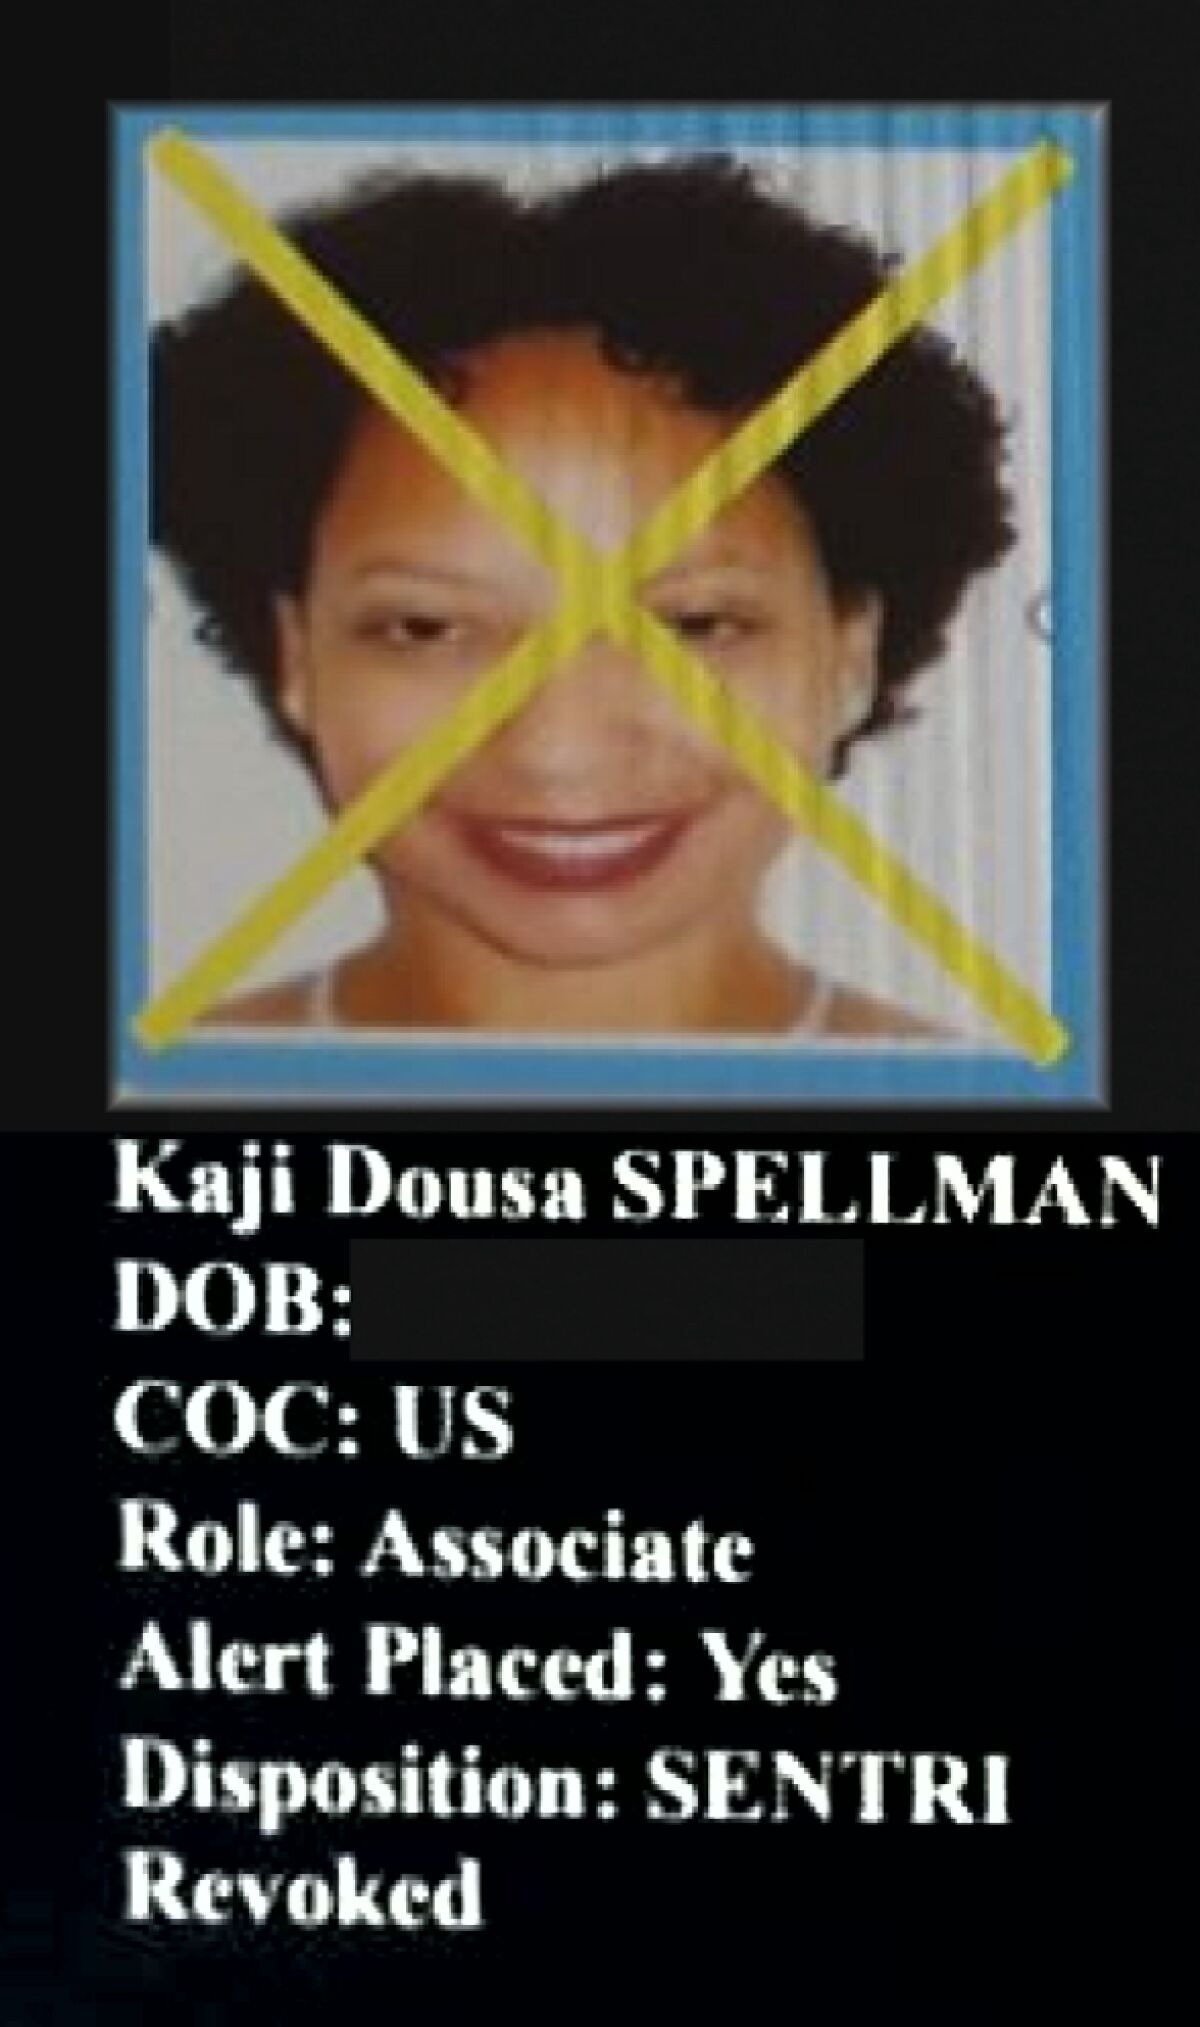 Pastor Kaji Dousa Spellman was included in a government dossier that consisted of people, most of them U.S. citizens, working across the border. Dousa’s photo had an “X” over it, signaling she’d been either interviewed or arrested by investigators.